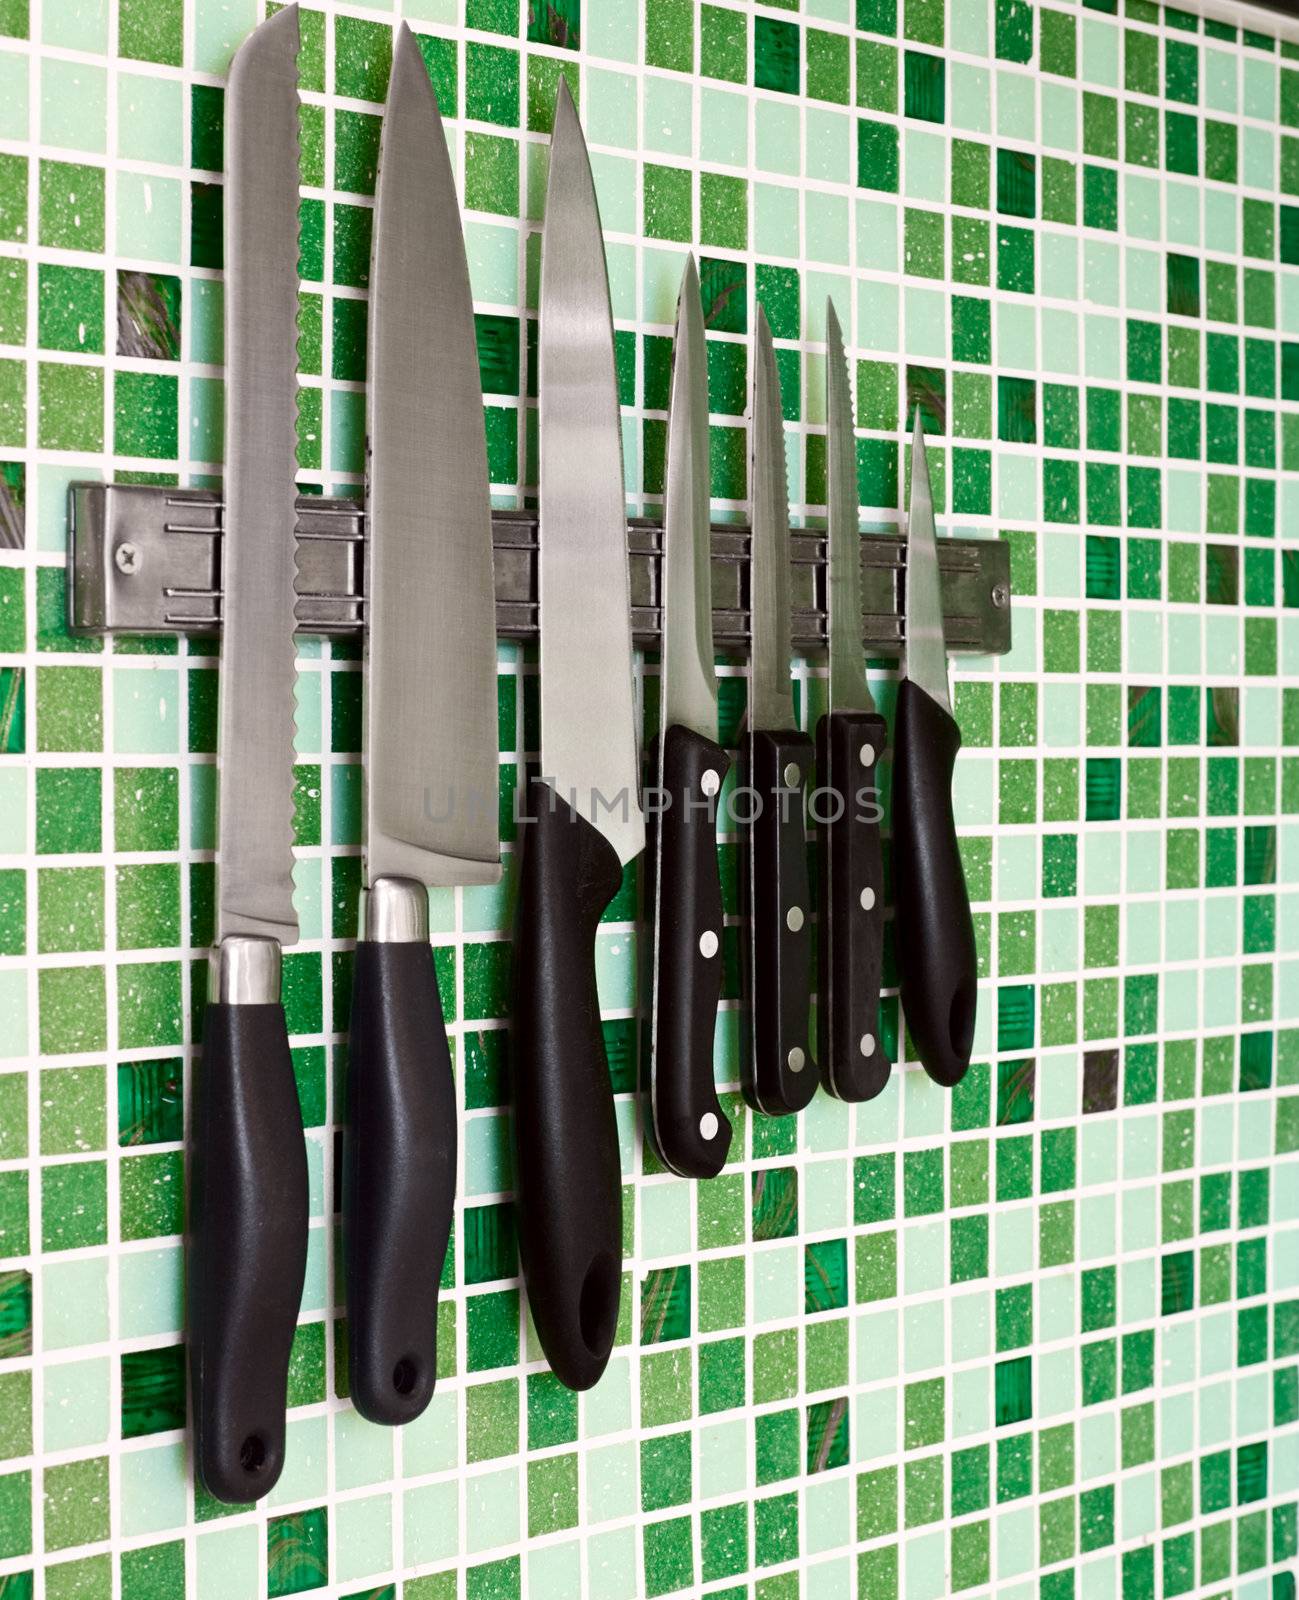 Knives on wall by naumoid